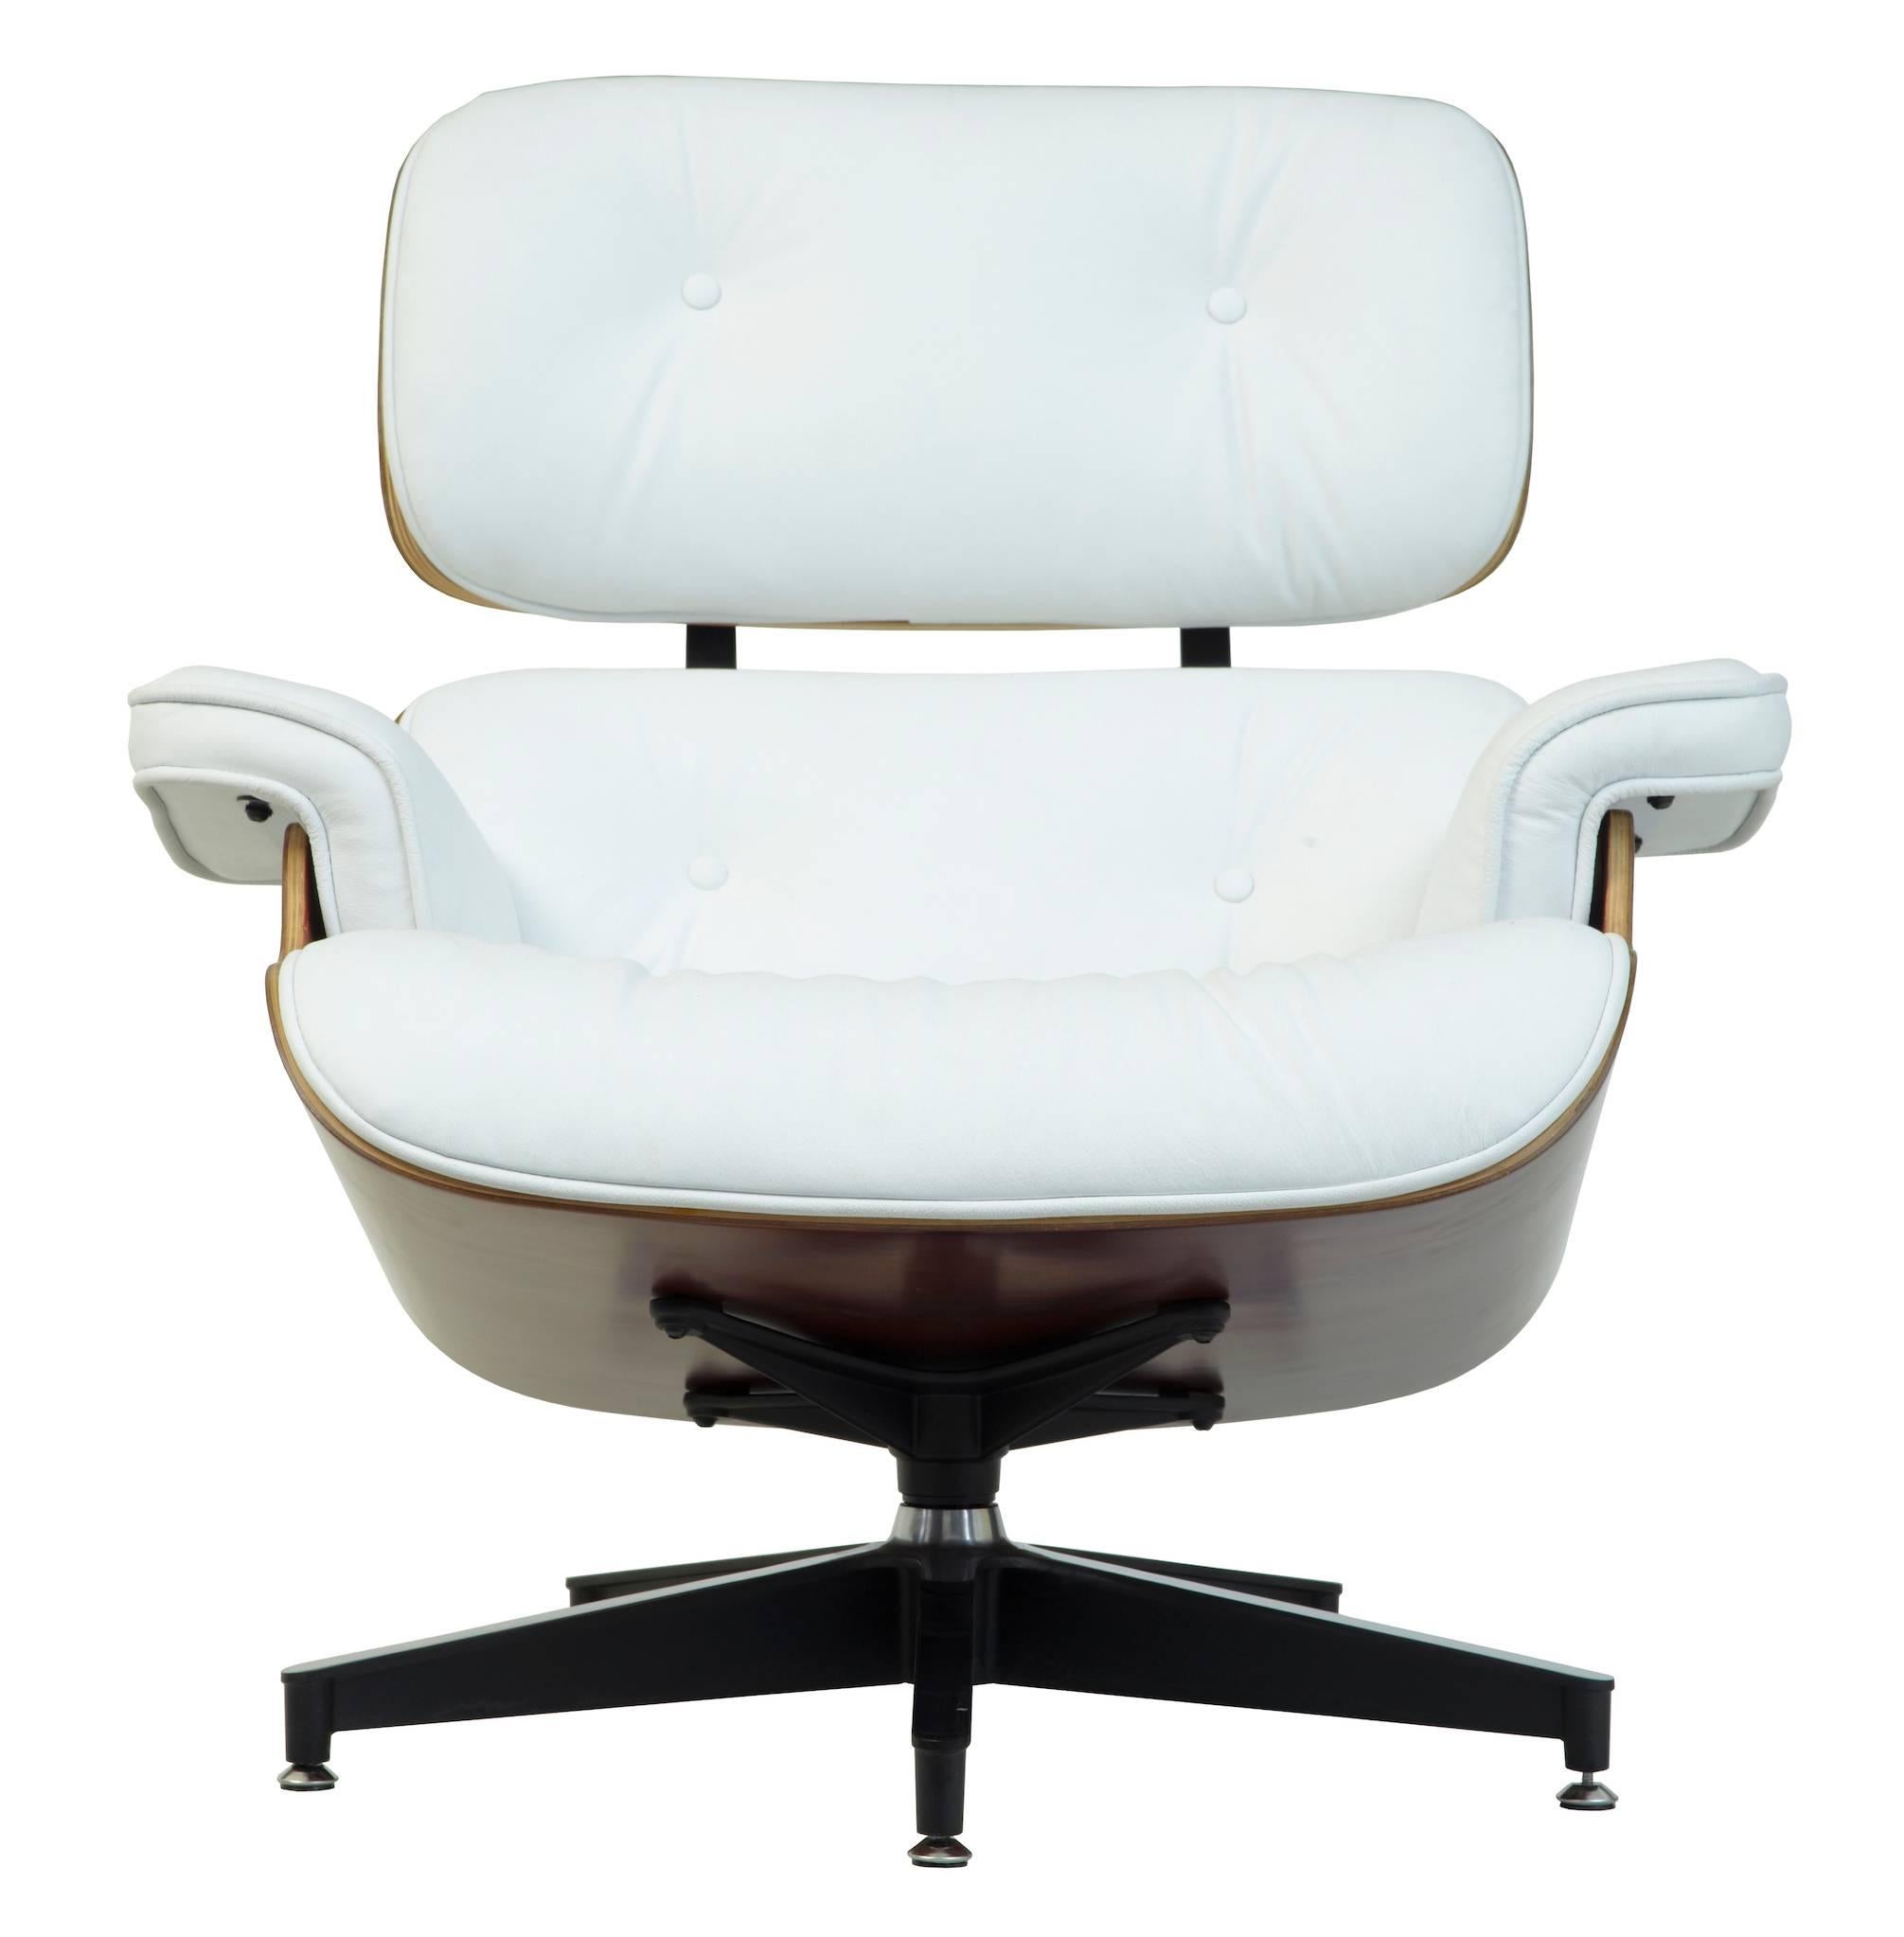 Reproductions of the popular eames design dating from 1956.
Made from moulded ply and comfortably upholstered in white leather.
Unlike most examples online, the chair and stool photographed is the pair you will be receiving.

Armchair